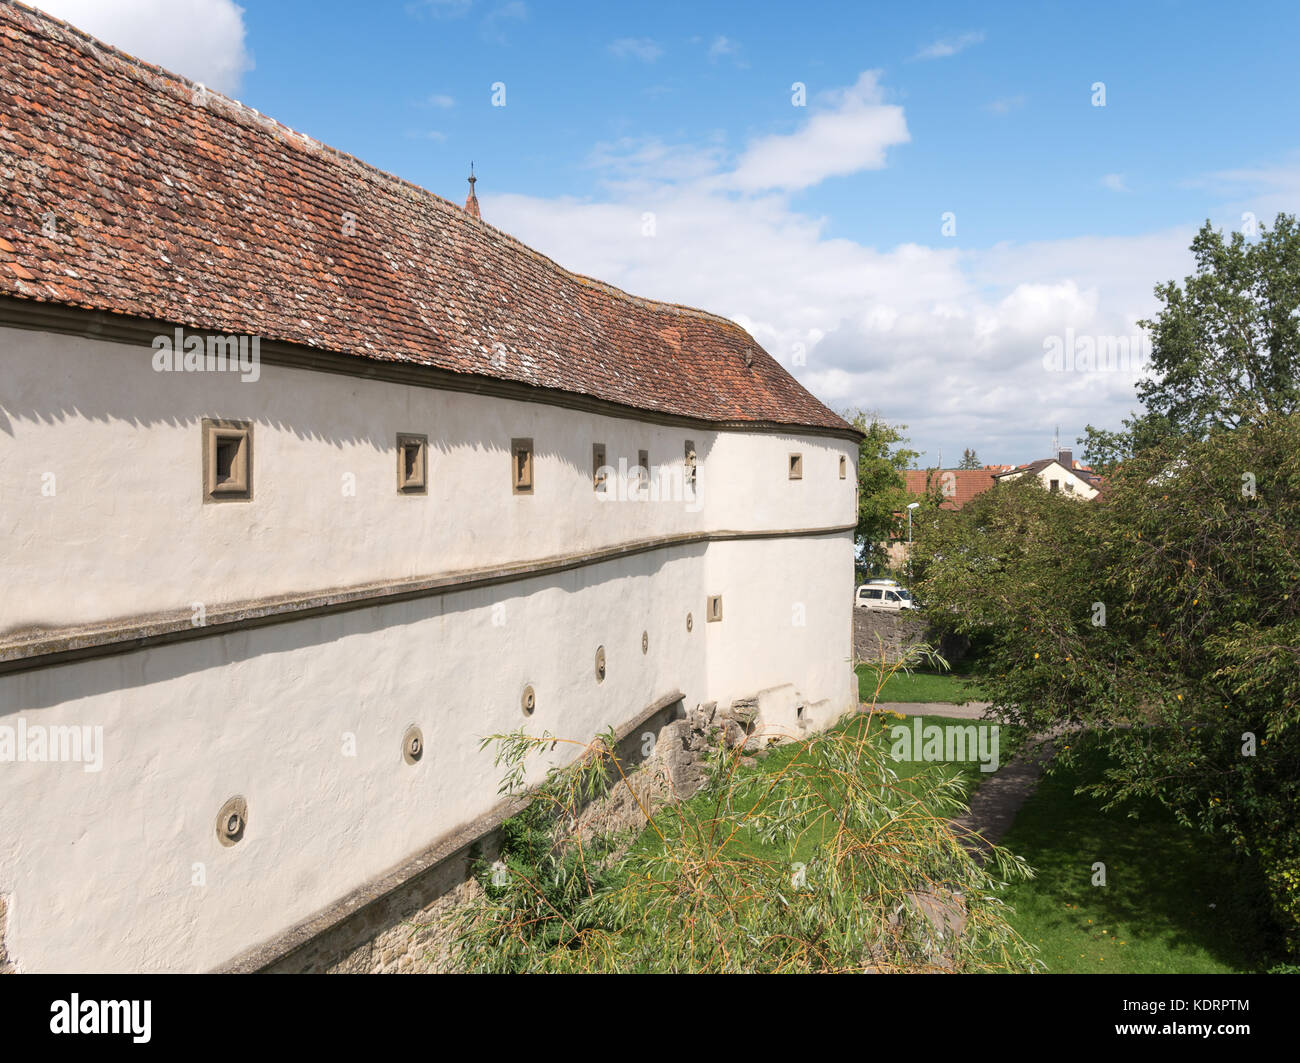 Outside view of the town walls, Rothenburg ob der Tauber, Bavaria, Germany, Europe Stock Photo